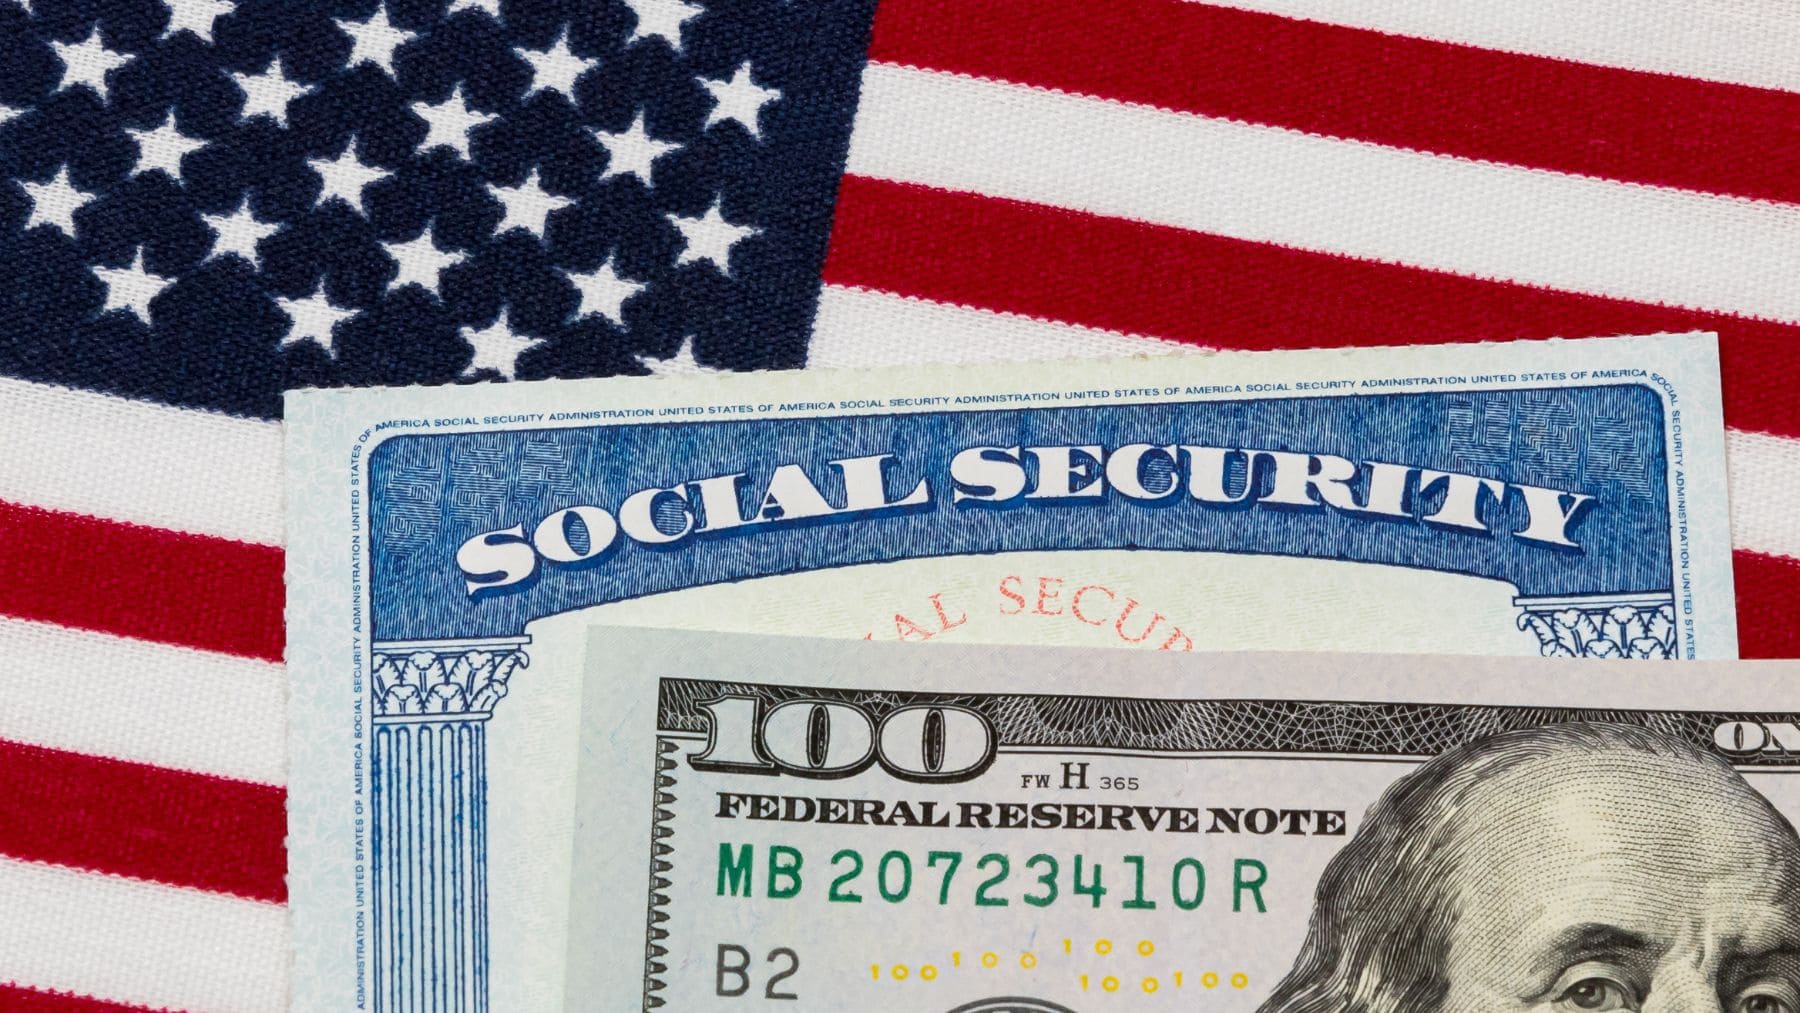 American flag with Social Security money and card